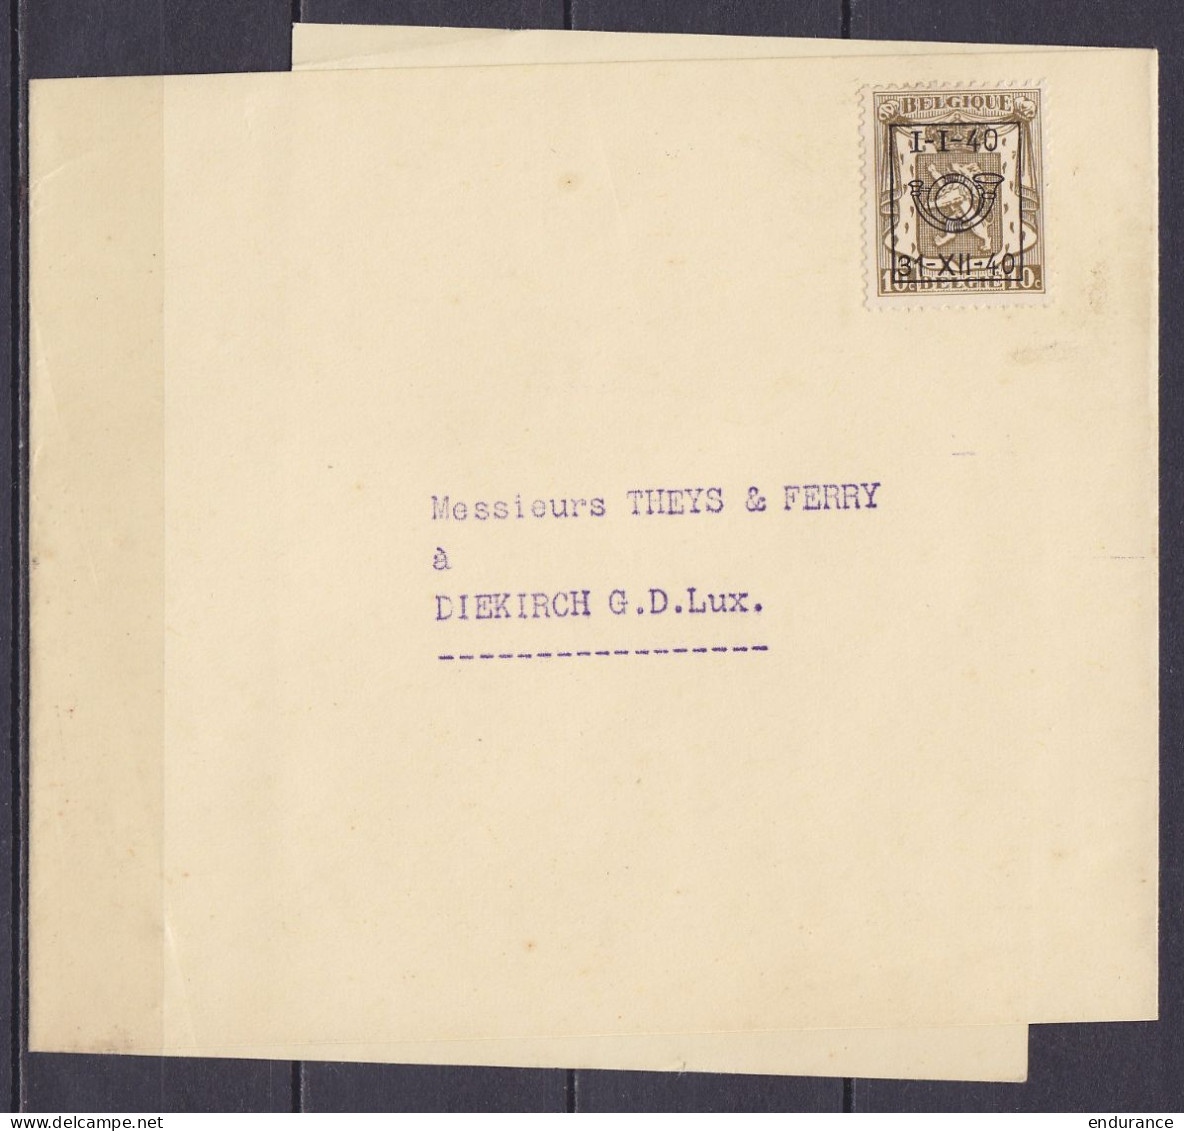 Bande D'impriné Affr. PREO 10c Olive (type N°420) Surch. [I-I-40 / 31-XII-40] Pour DIEKIRCH Luxembourg - Typo Precancels 1936-51 (Small Seal Of The State)